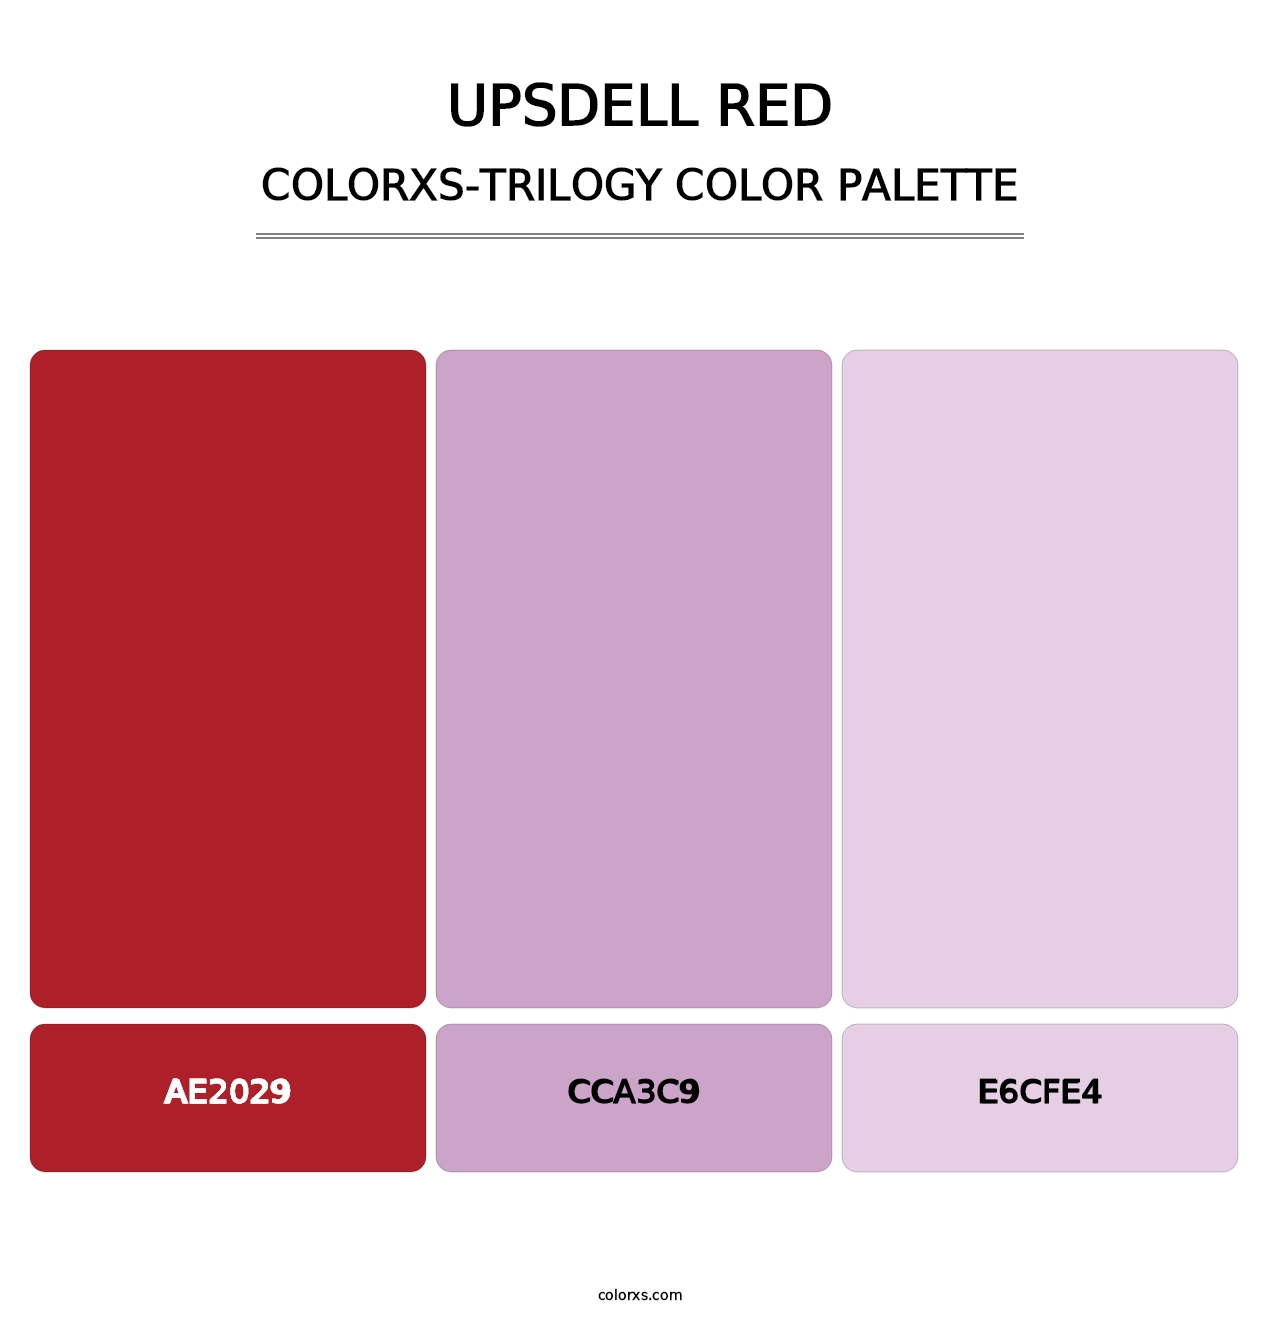 Upsdell Red - Colorxs Trilogy Palette